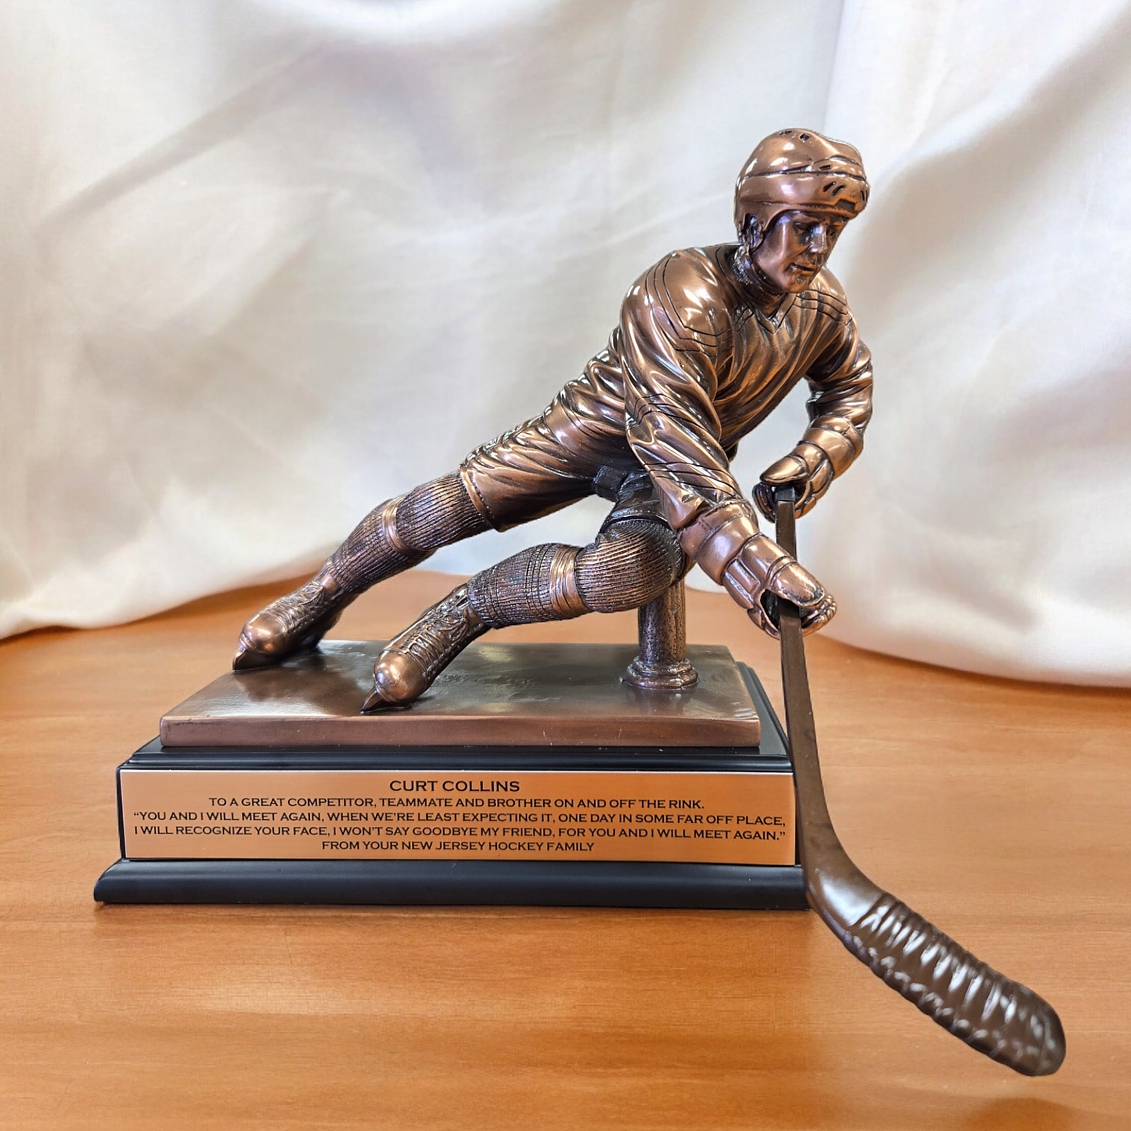 Hockey Trophy RFB023 features a resin statue coated with a bronze metal for added detail & strength. The hockey player is in full uniform with his stick in hand. It's mounted on a black base that includes a matching bronze plate that is personalized. It's 12" x 10" in size & weighs over 8 lbs.